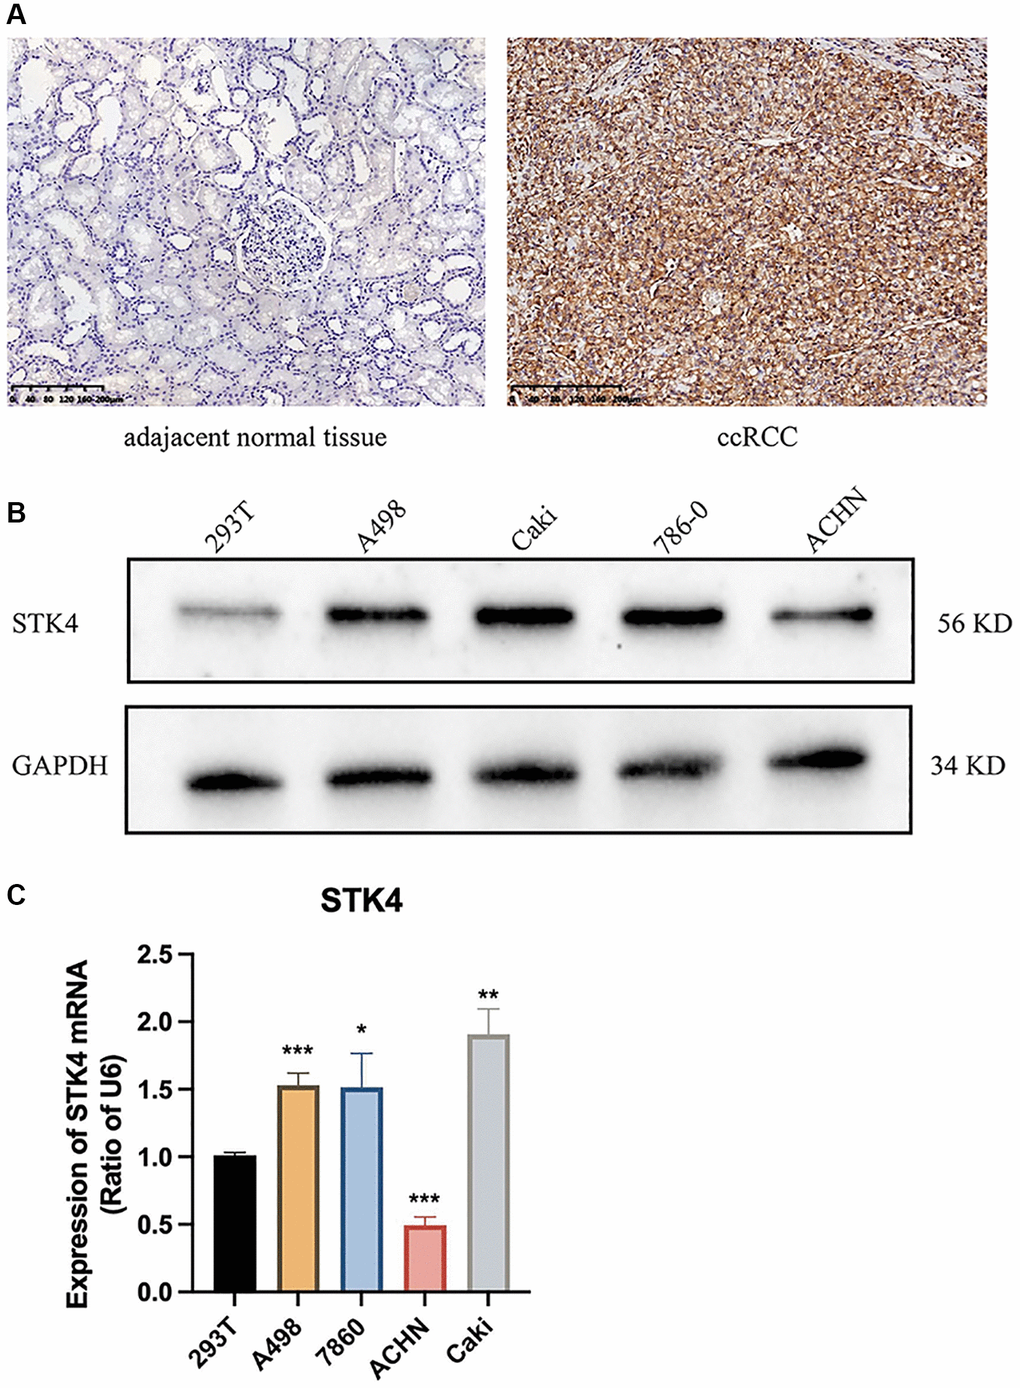 Experiment results of STK4 expression in ccRCC. IHC (A), WB (B), and q-pCR (C) results of STK4 expression in ccRCC.